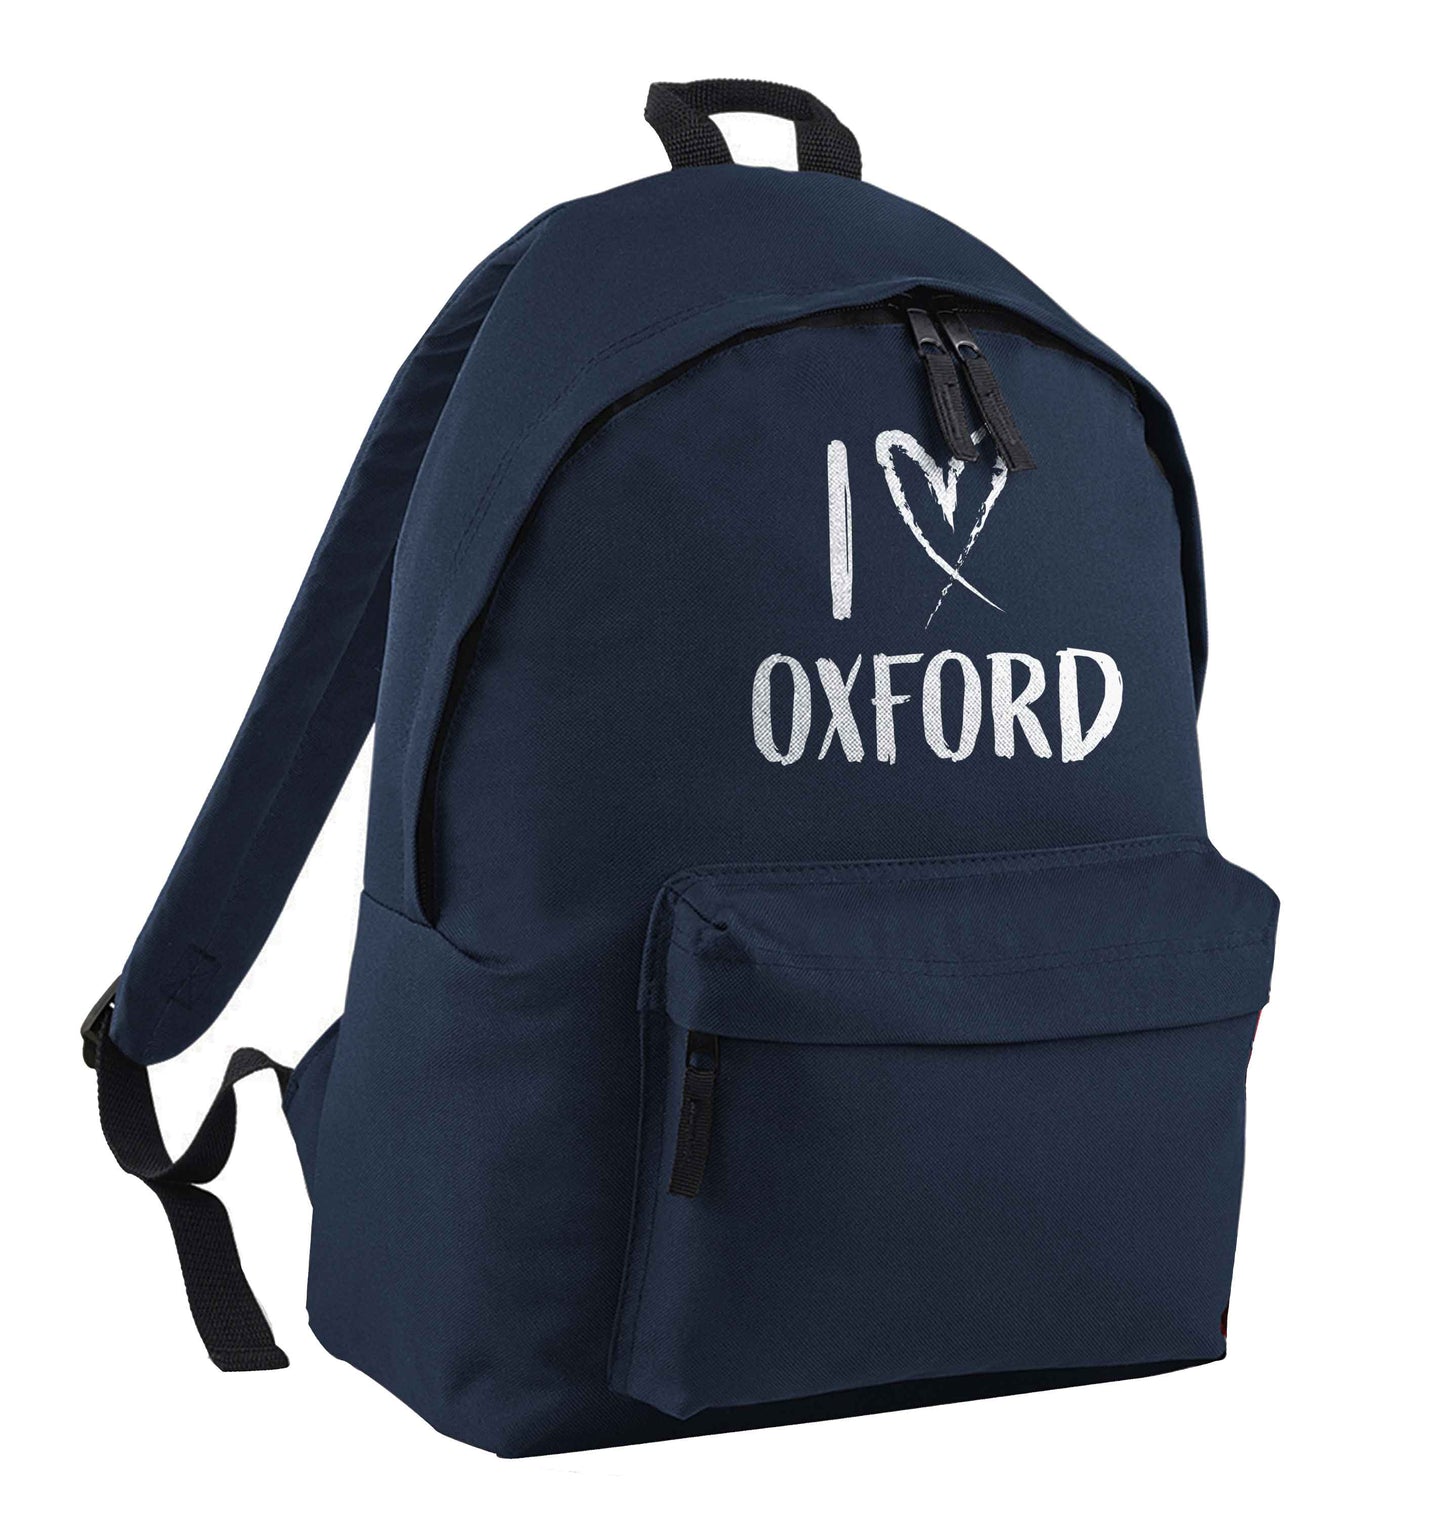 I love Oxford navy adults backpack